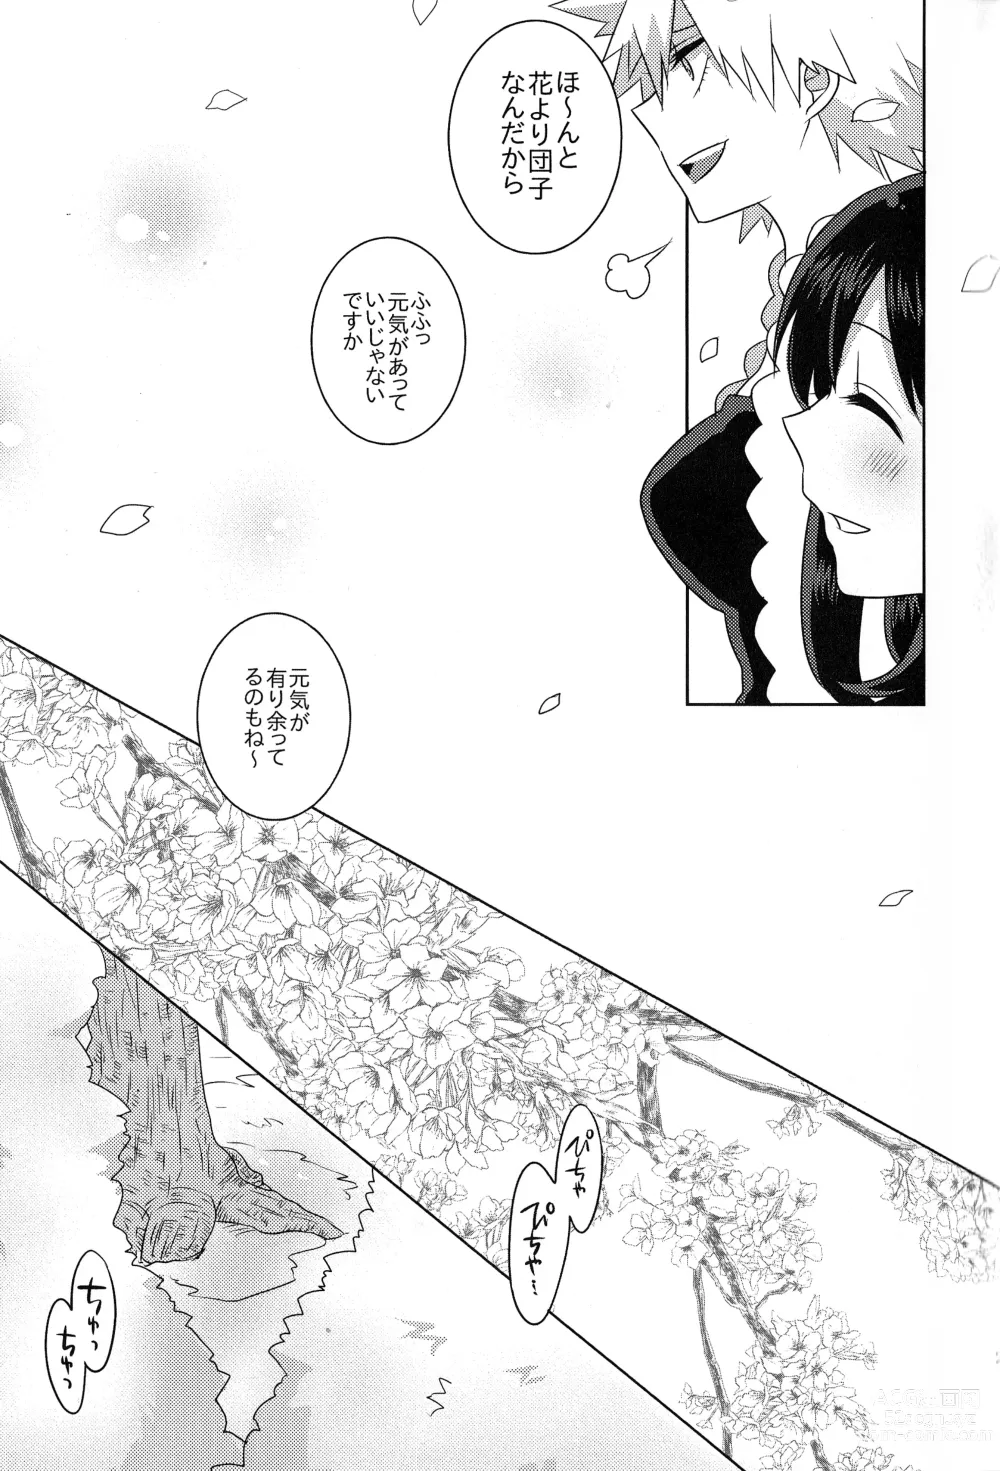 Page 28 of doujinshi The Four Seasons ~KD R18 Anthology~